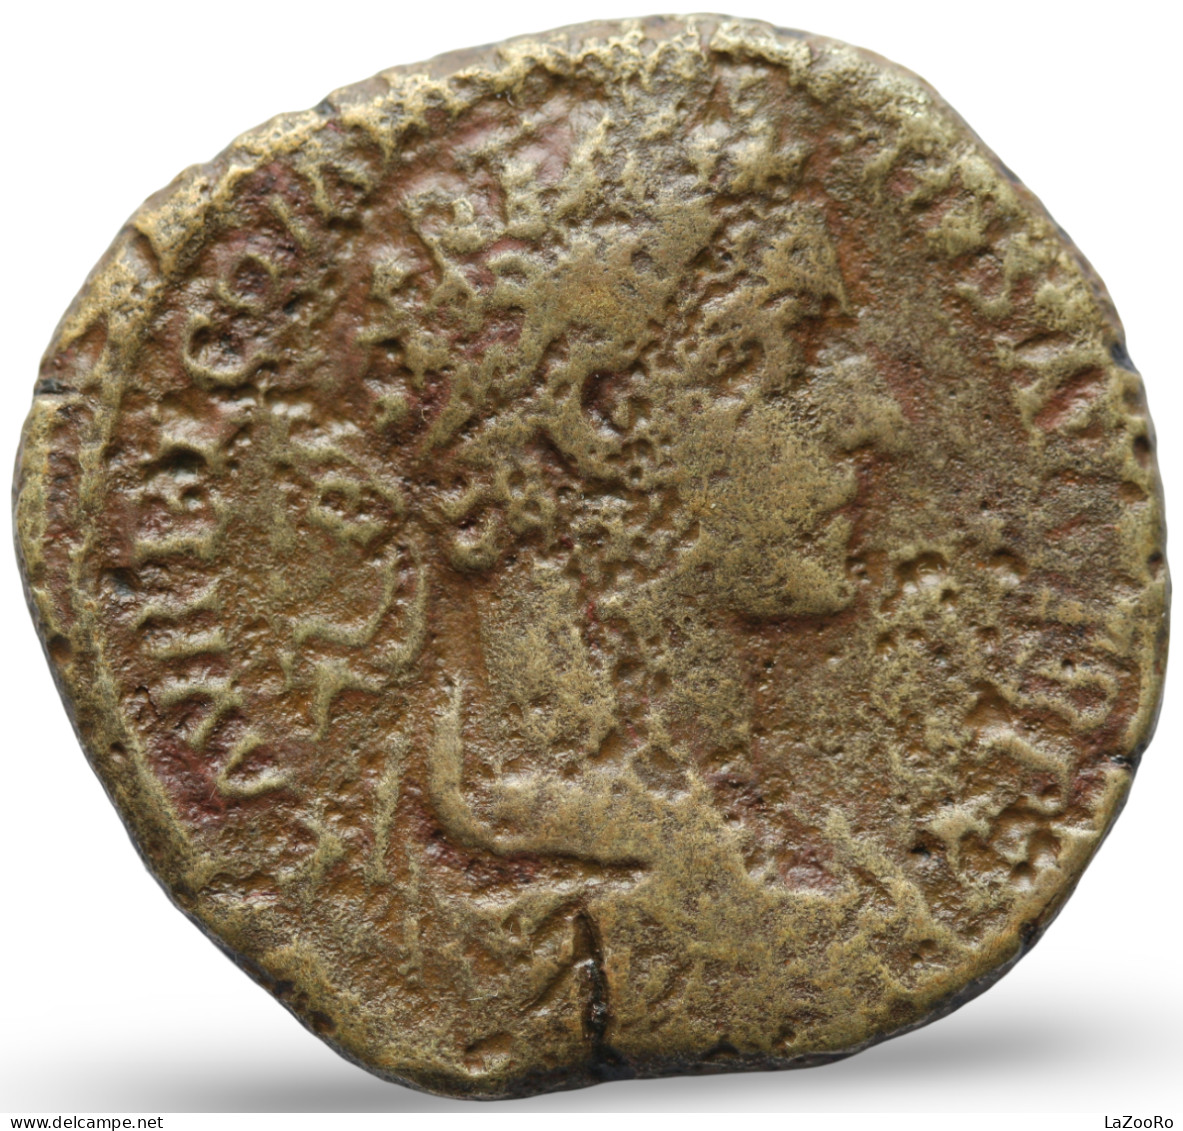 LaZooRo: Roman Empire - AE Sestertius Of Commodus (177-192 AD), Victory, Jupiter - The Anthonines (96 AD To 192 AD)